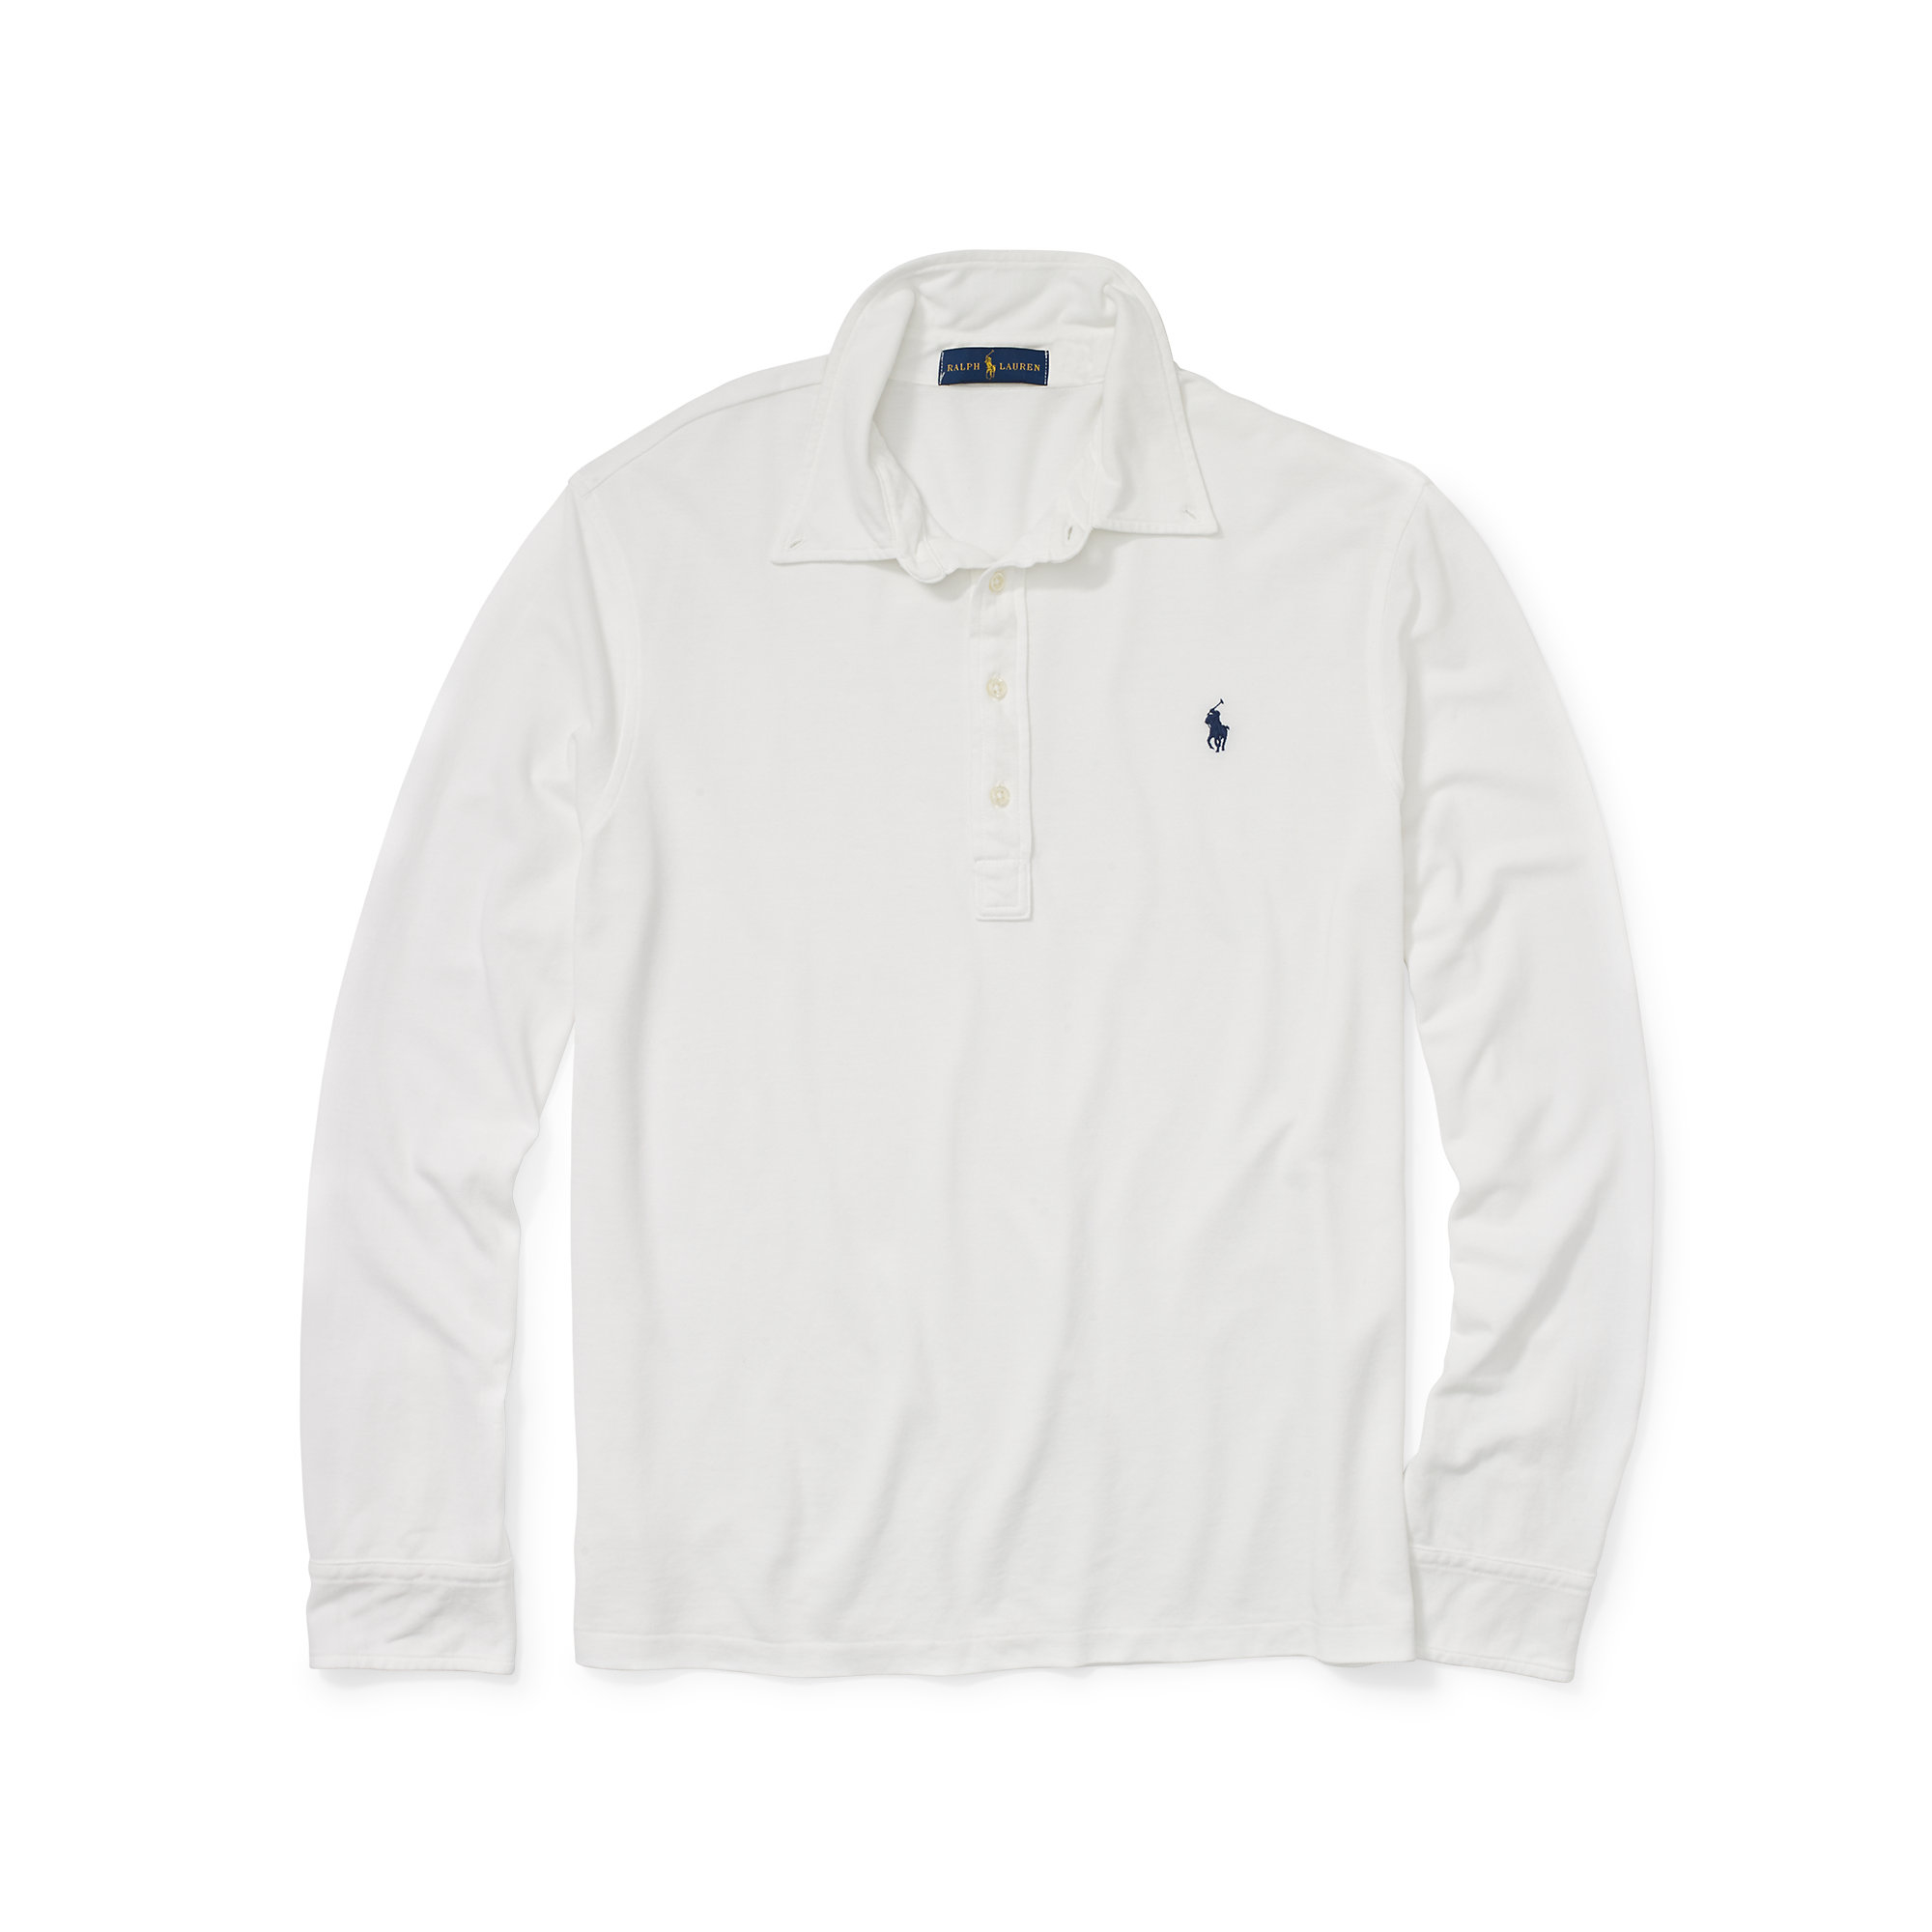 Polo Ralph Lauren Cotton Featherweight Mesh Popover in White for Men - Lyst